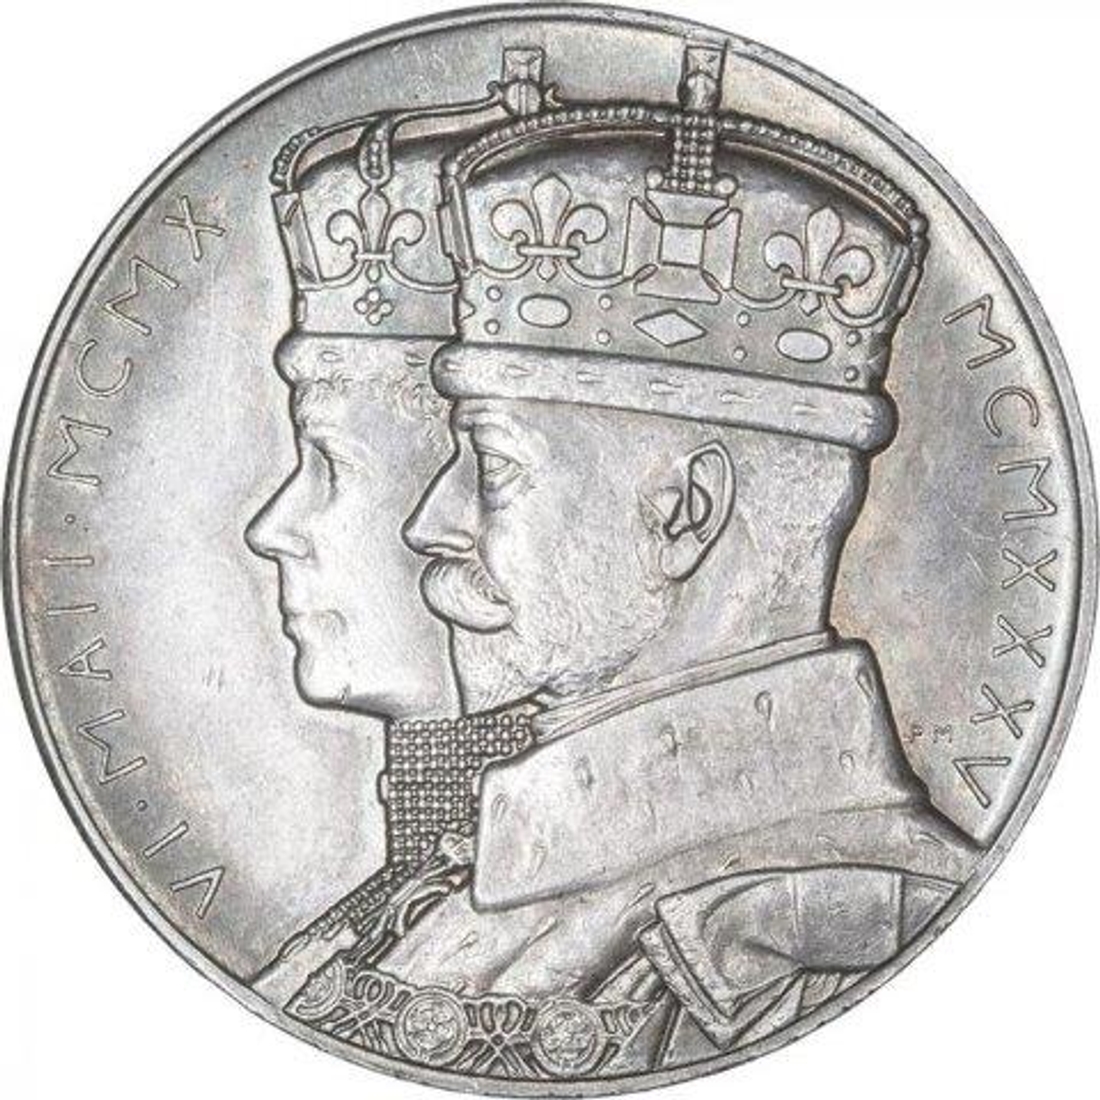 Medallion of Silver Jubilee of King George V of Great Britain.